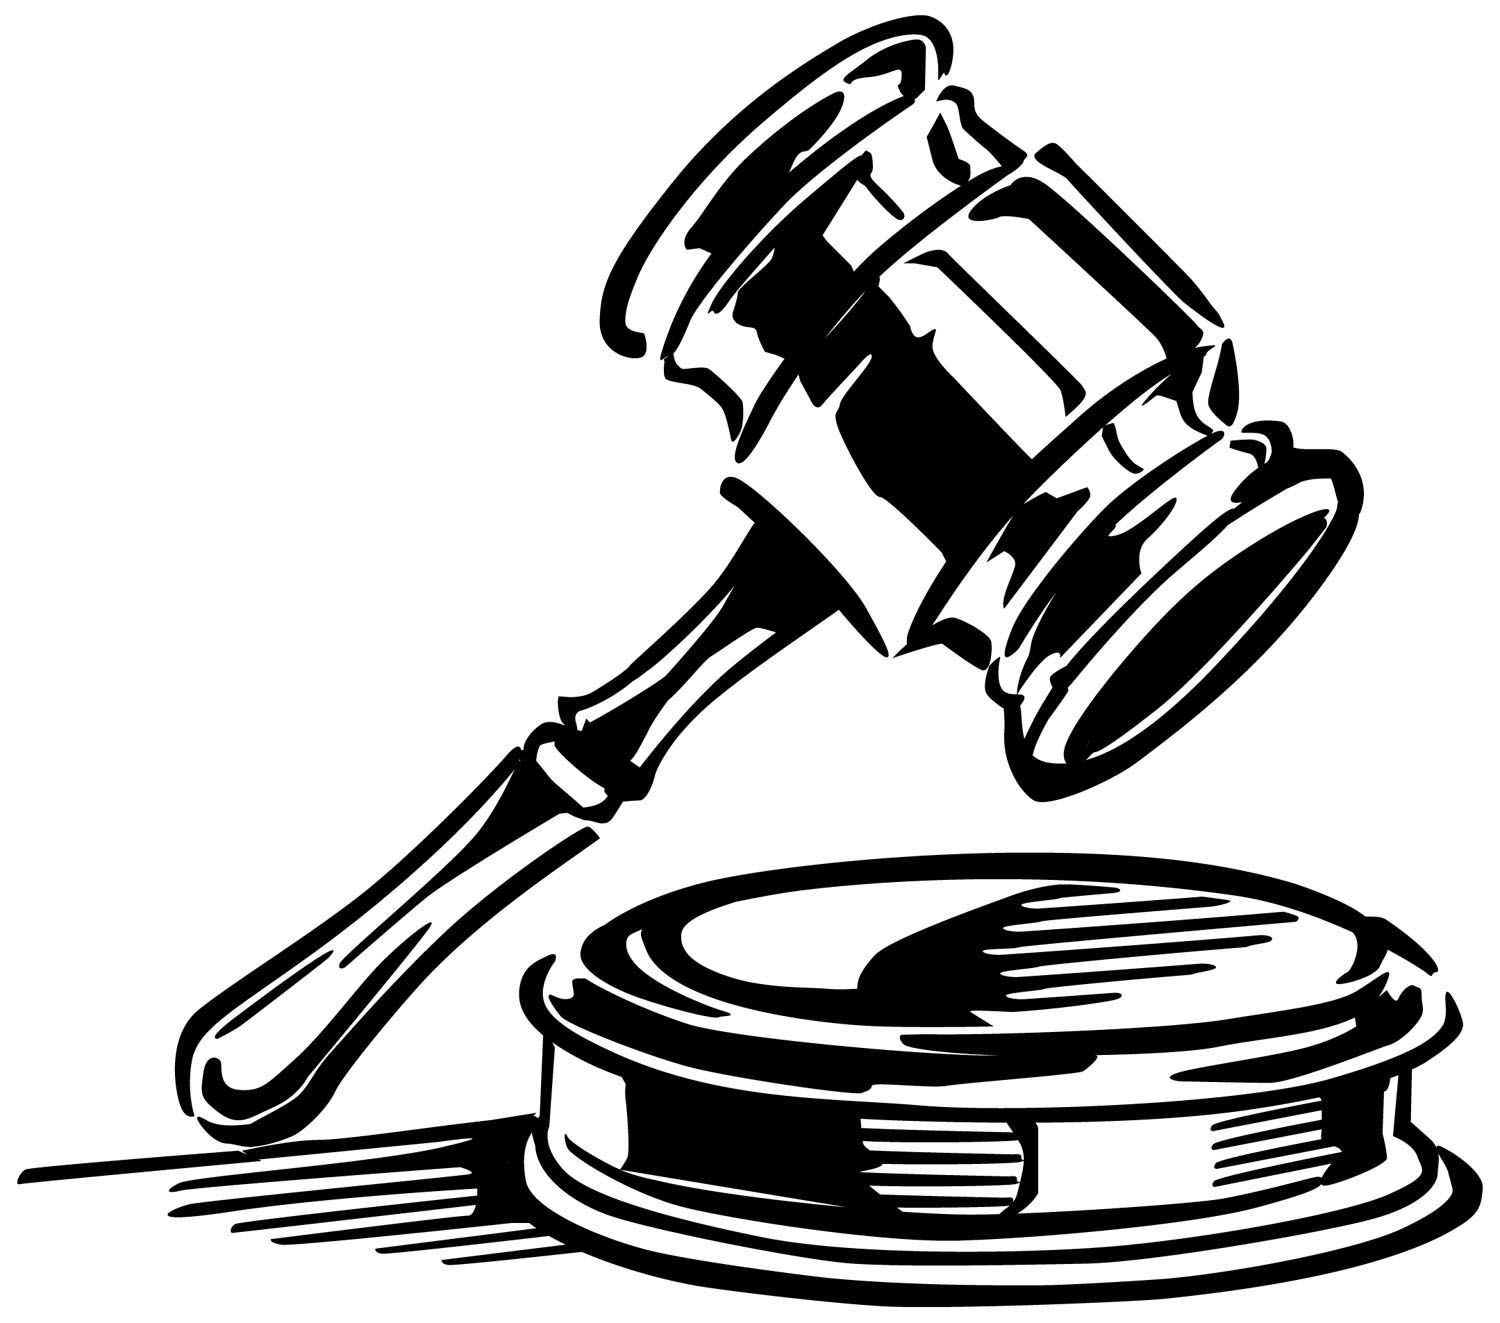 Gavel Clipart - Cliparts.co